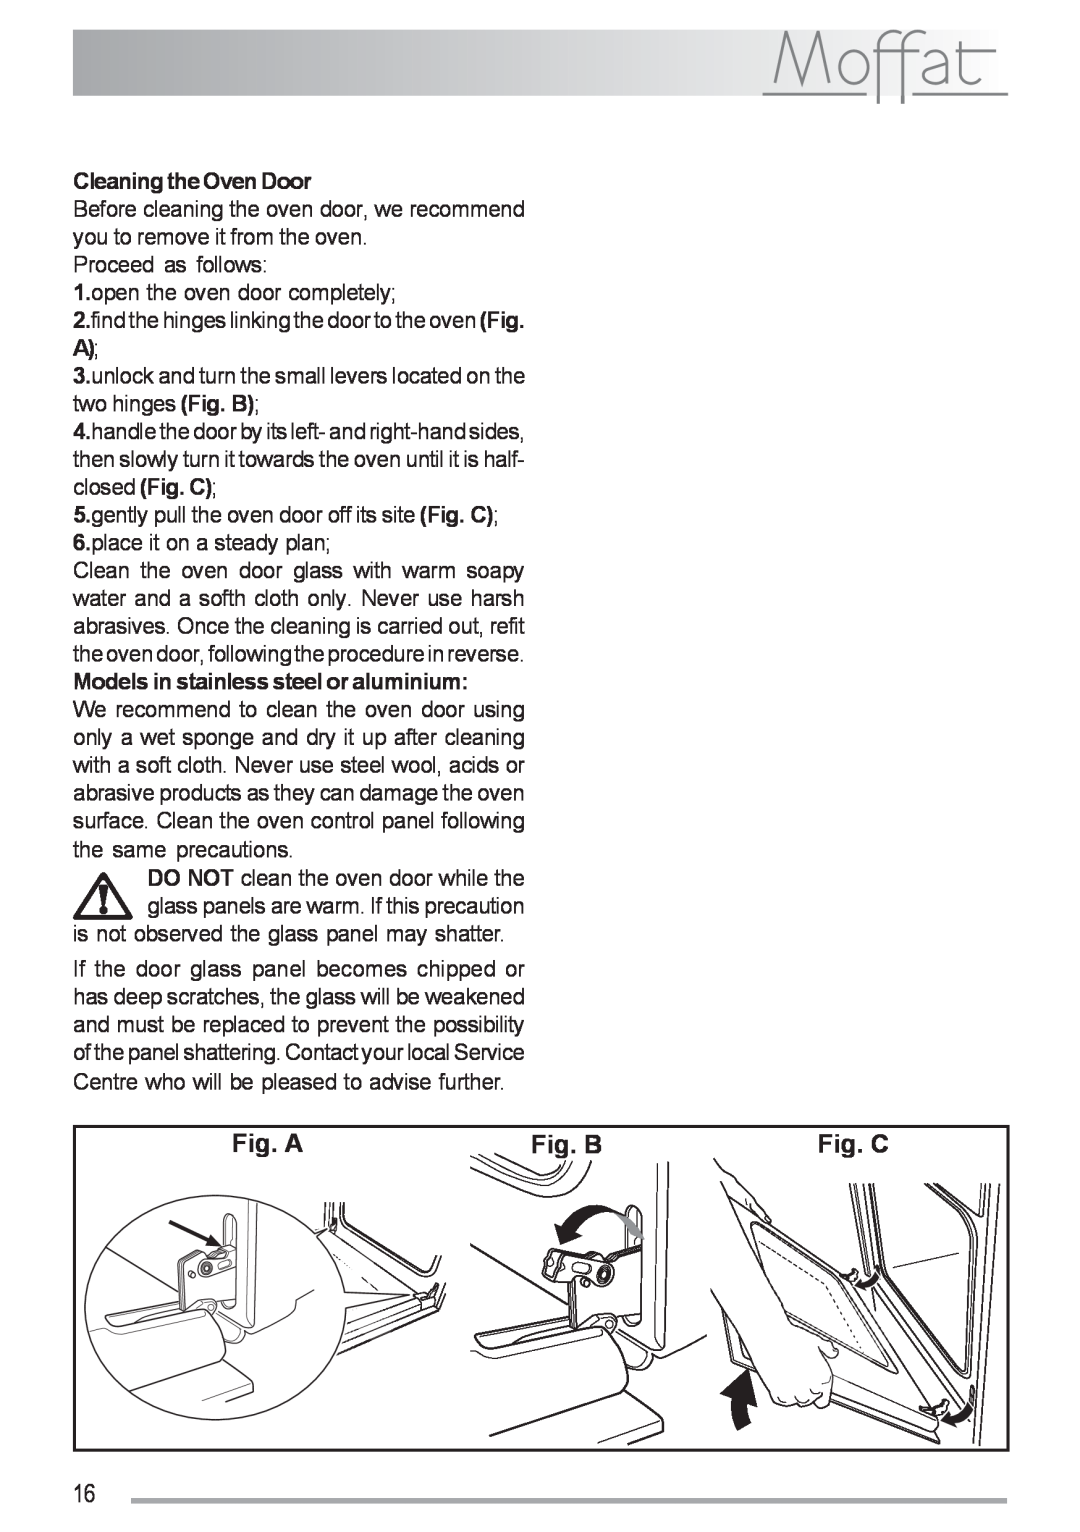 Moffat MSF 616 manual Fig. A, Fig. B, Fig. C, Cleaning the Oven Door, Models in stainless steel or aluminium 